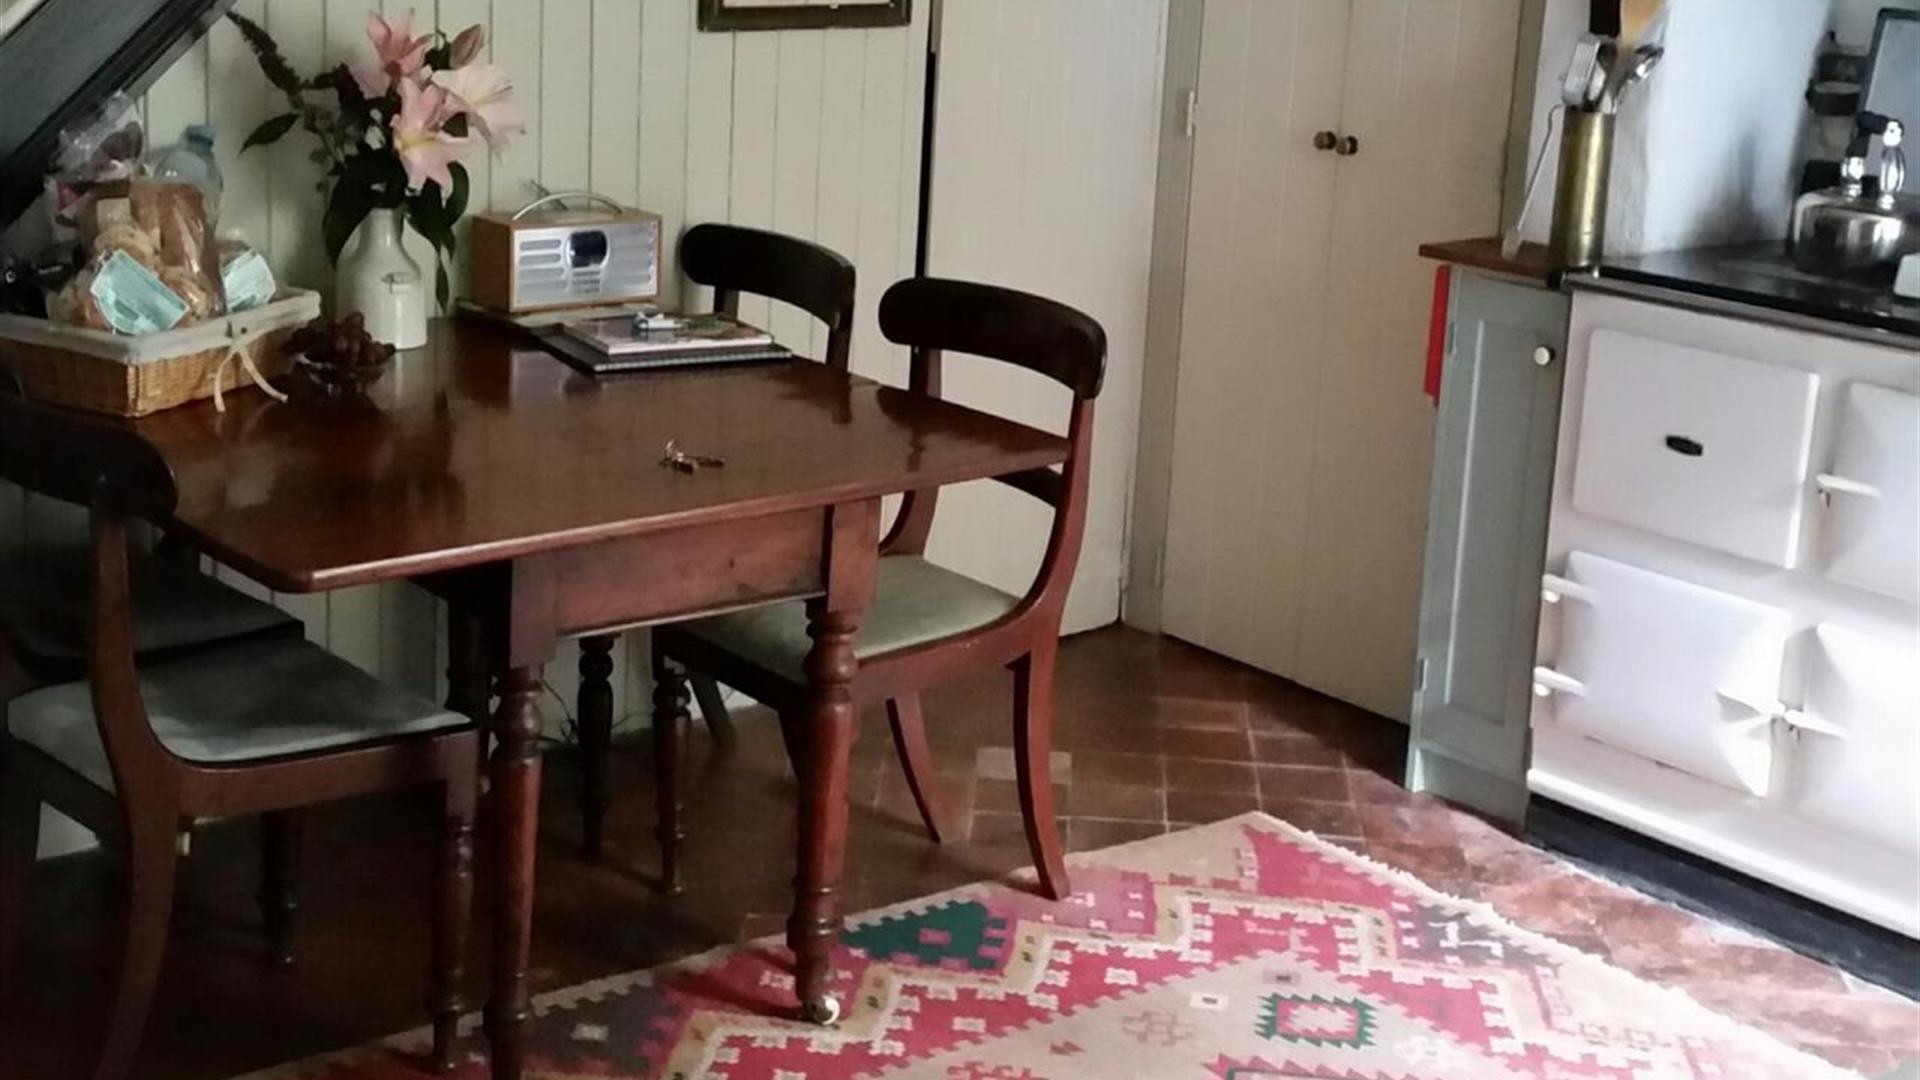 Image shows kitchen dining area with table and four chairs plus Aga